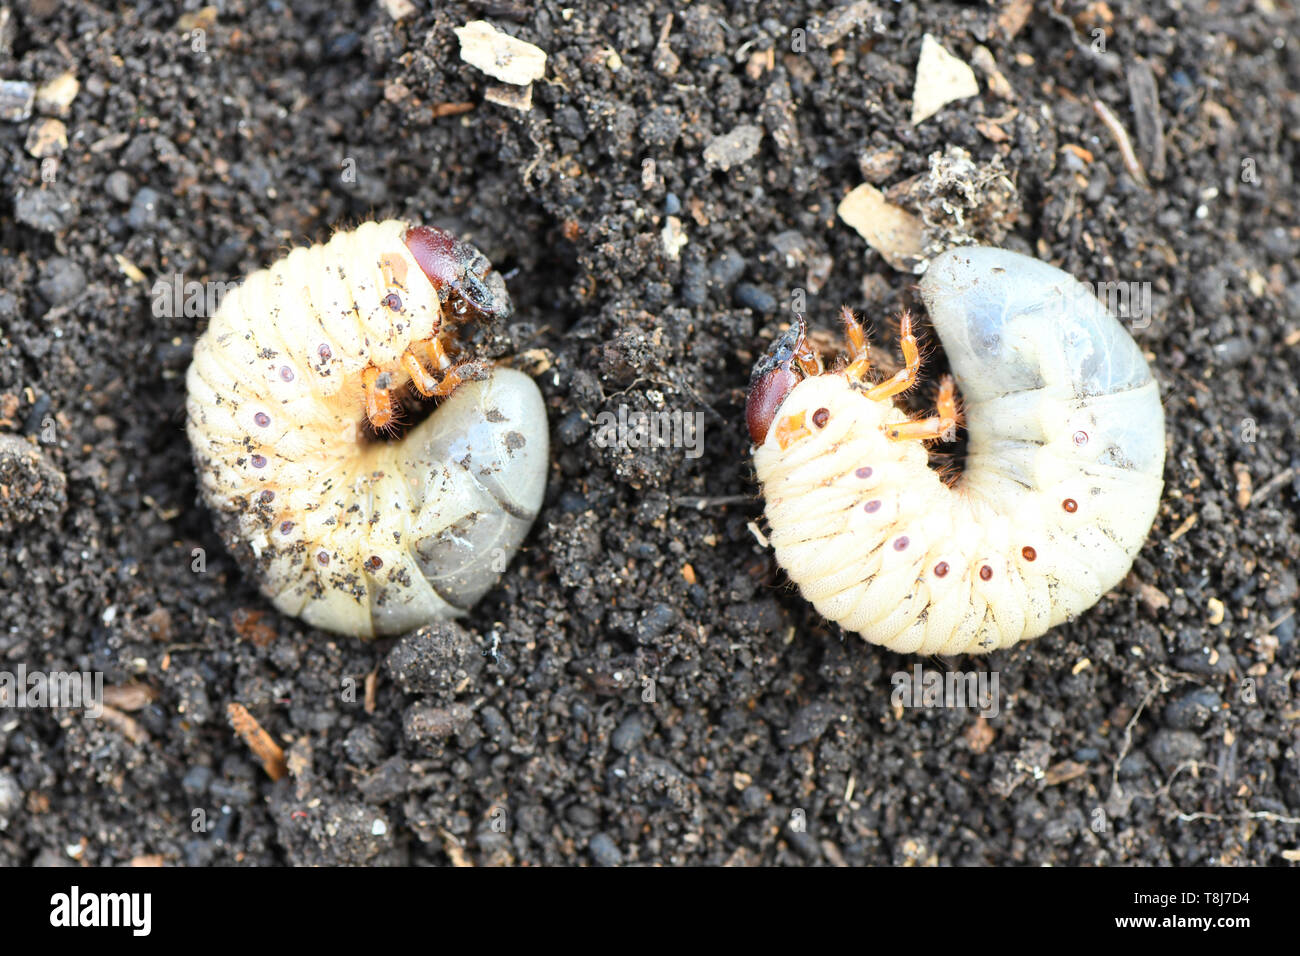 Larva of two may beetle (Melolontha) on the dirt. High resolution photo. Stock Photo